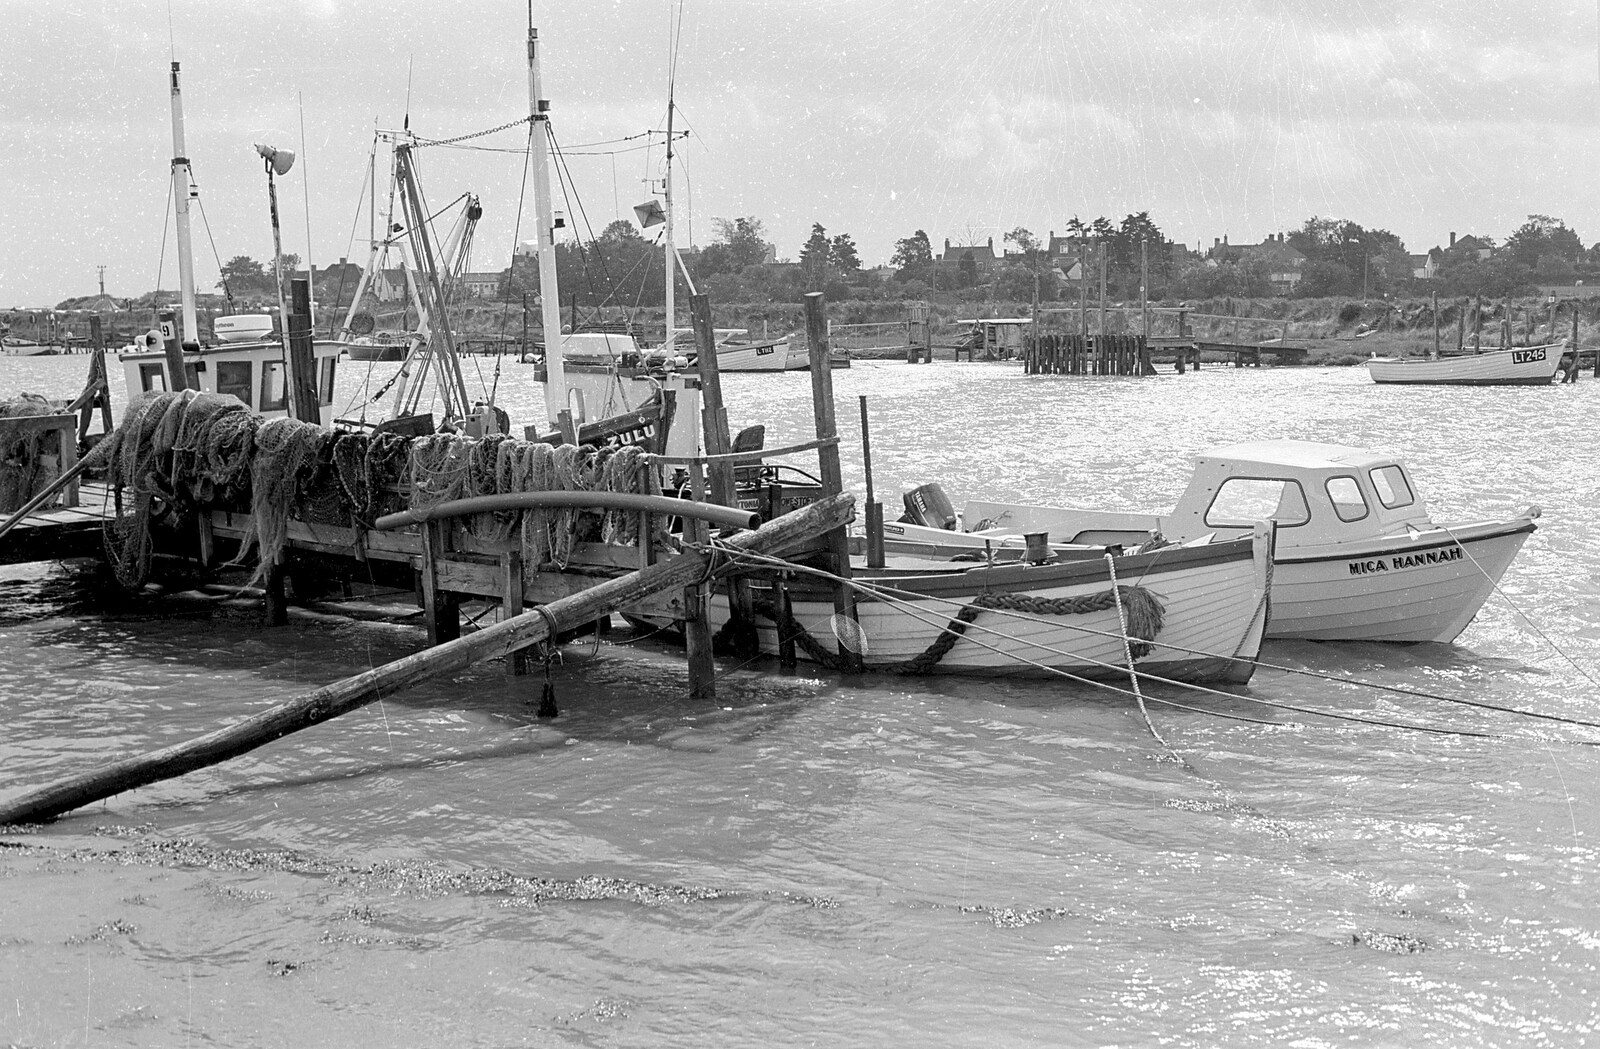 A pontoon covered in nets on the Blyth from Blackshore Quay in Black and White, Southwold and Sizewell, Suffolk - 16th September 1992